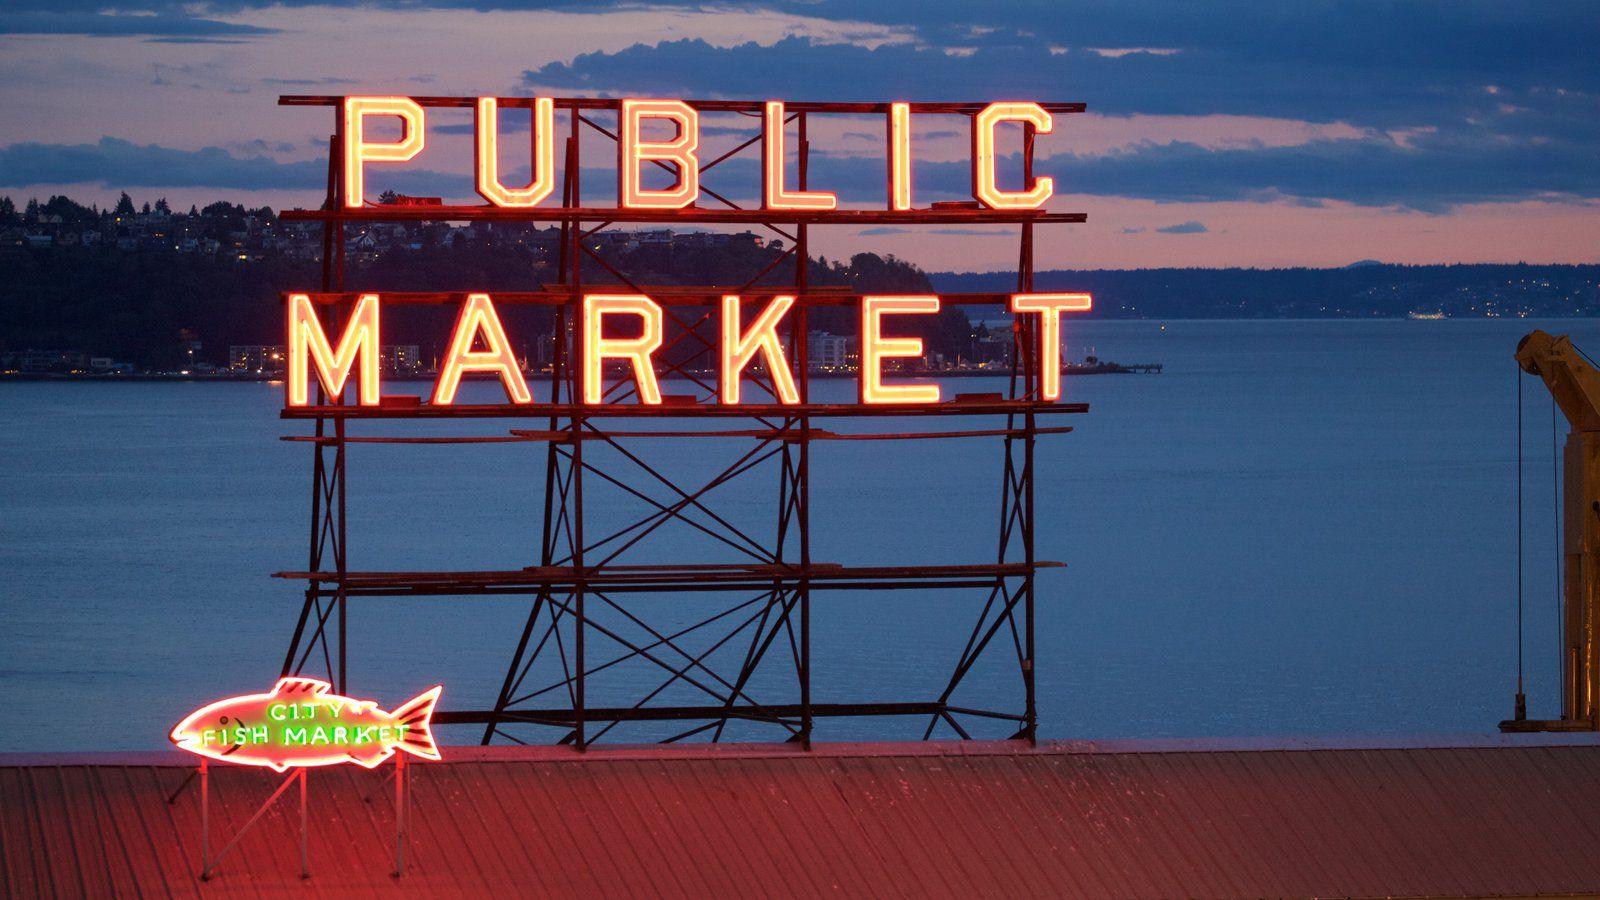 Pike Place Market Logo - Pike Place Market Pictures: View Photos & Images of Pike Place Market